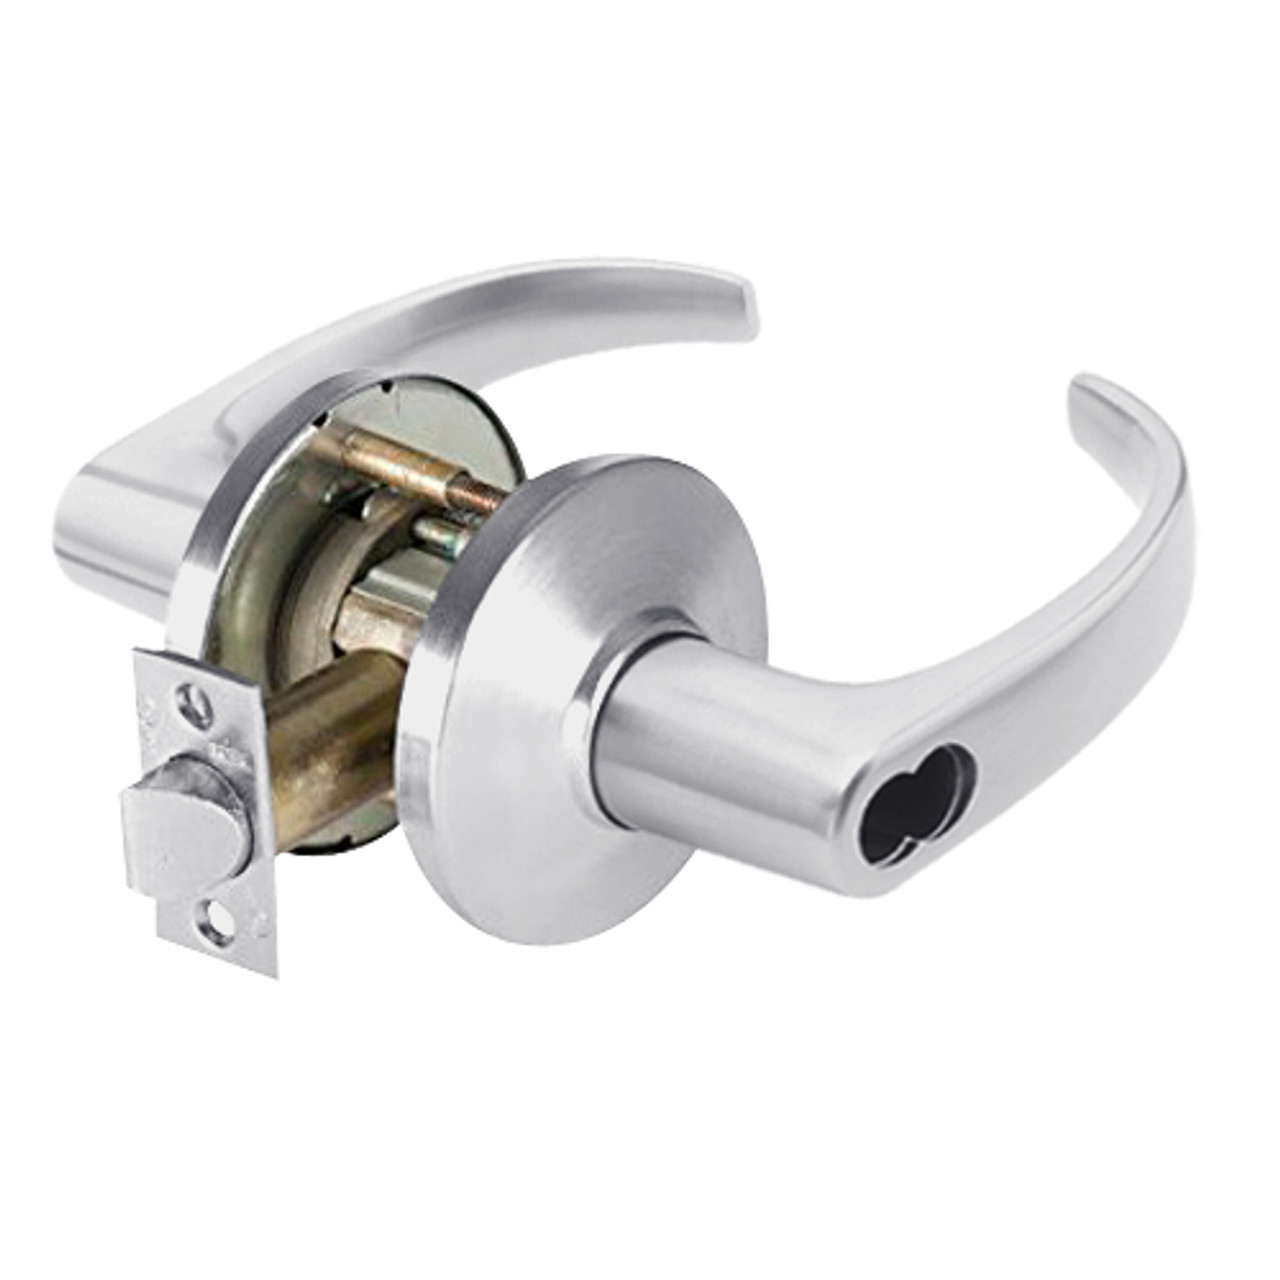 9K47IN14DSTK626 Best 9K Series Intruder Cylindrical Lever Locks with Curved with Return Lever Design Accept 7 Pin Best Core in Satin Chrome